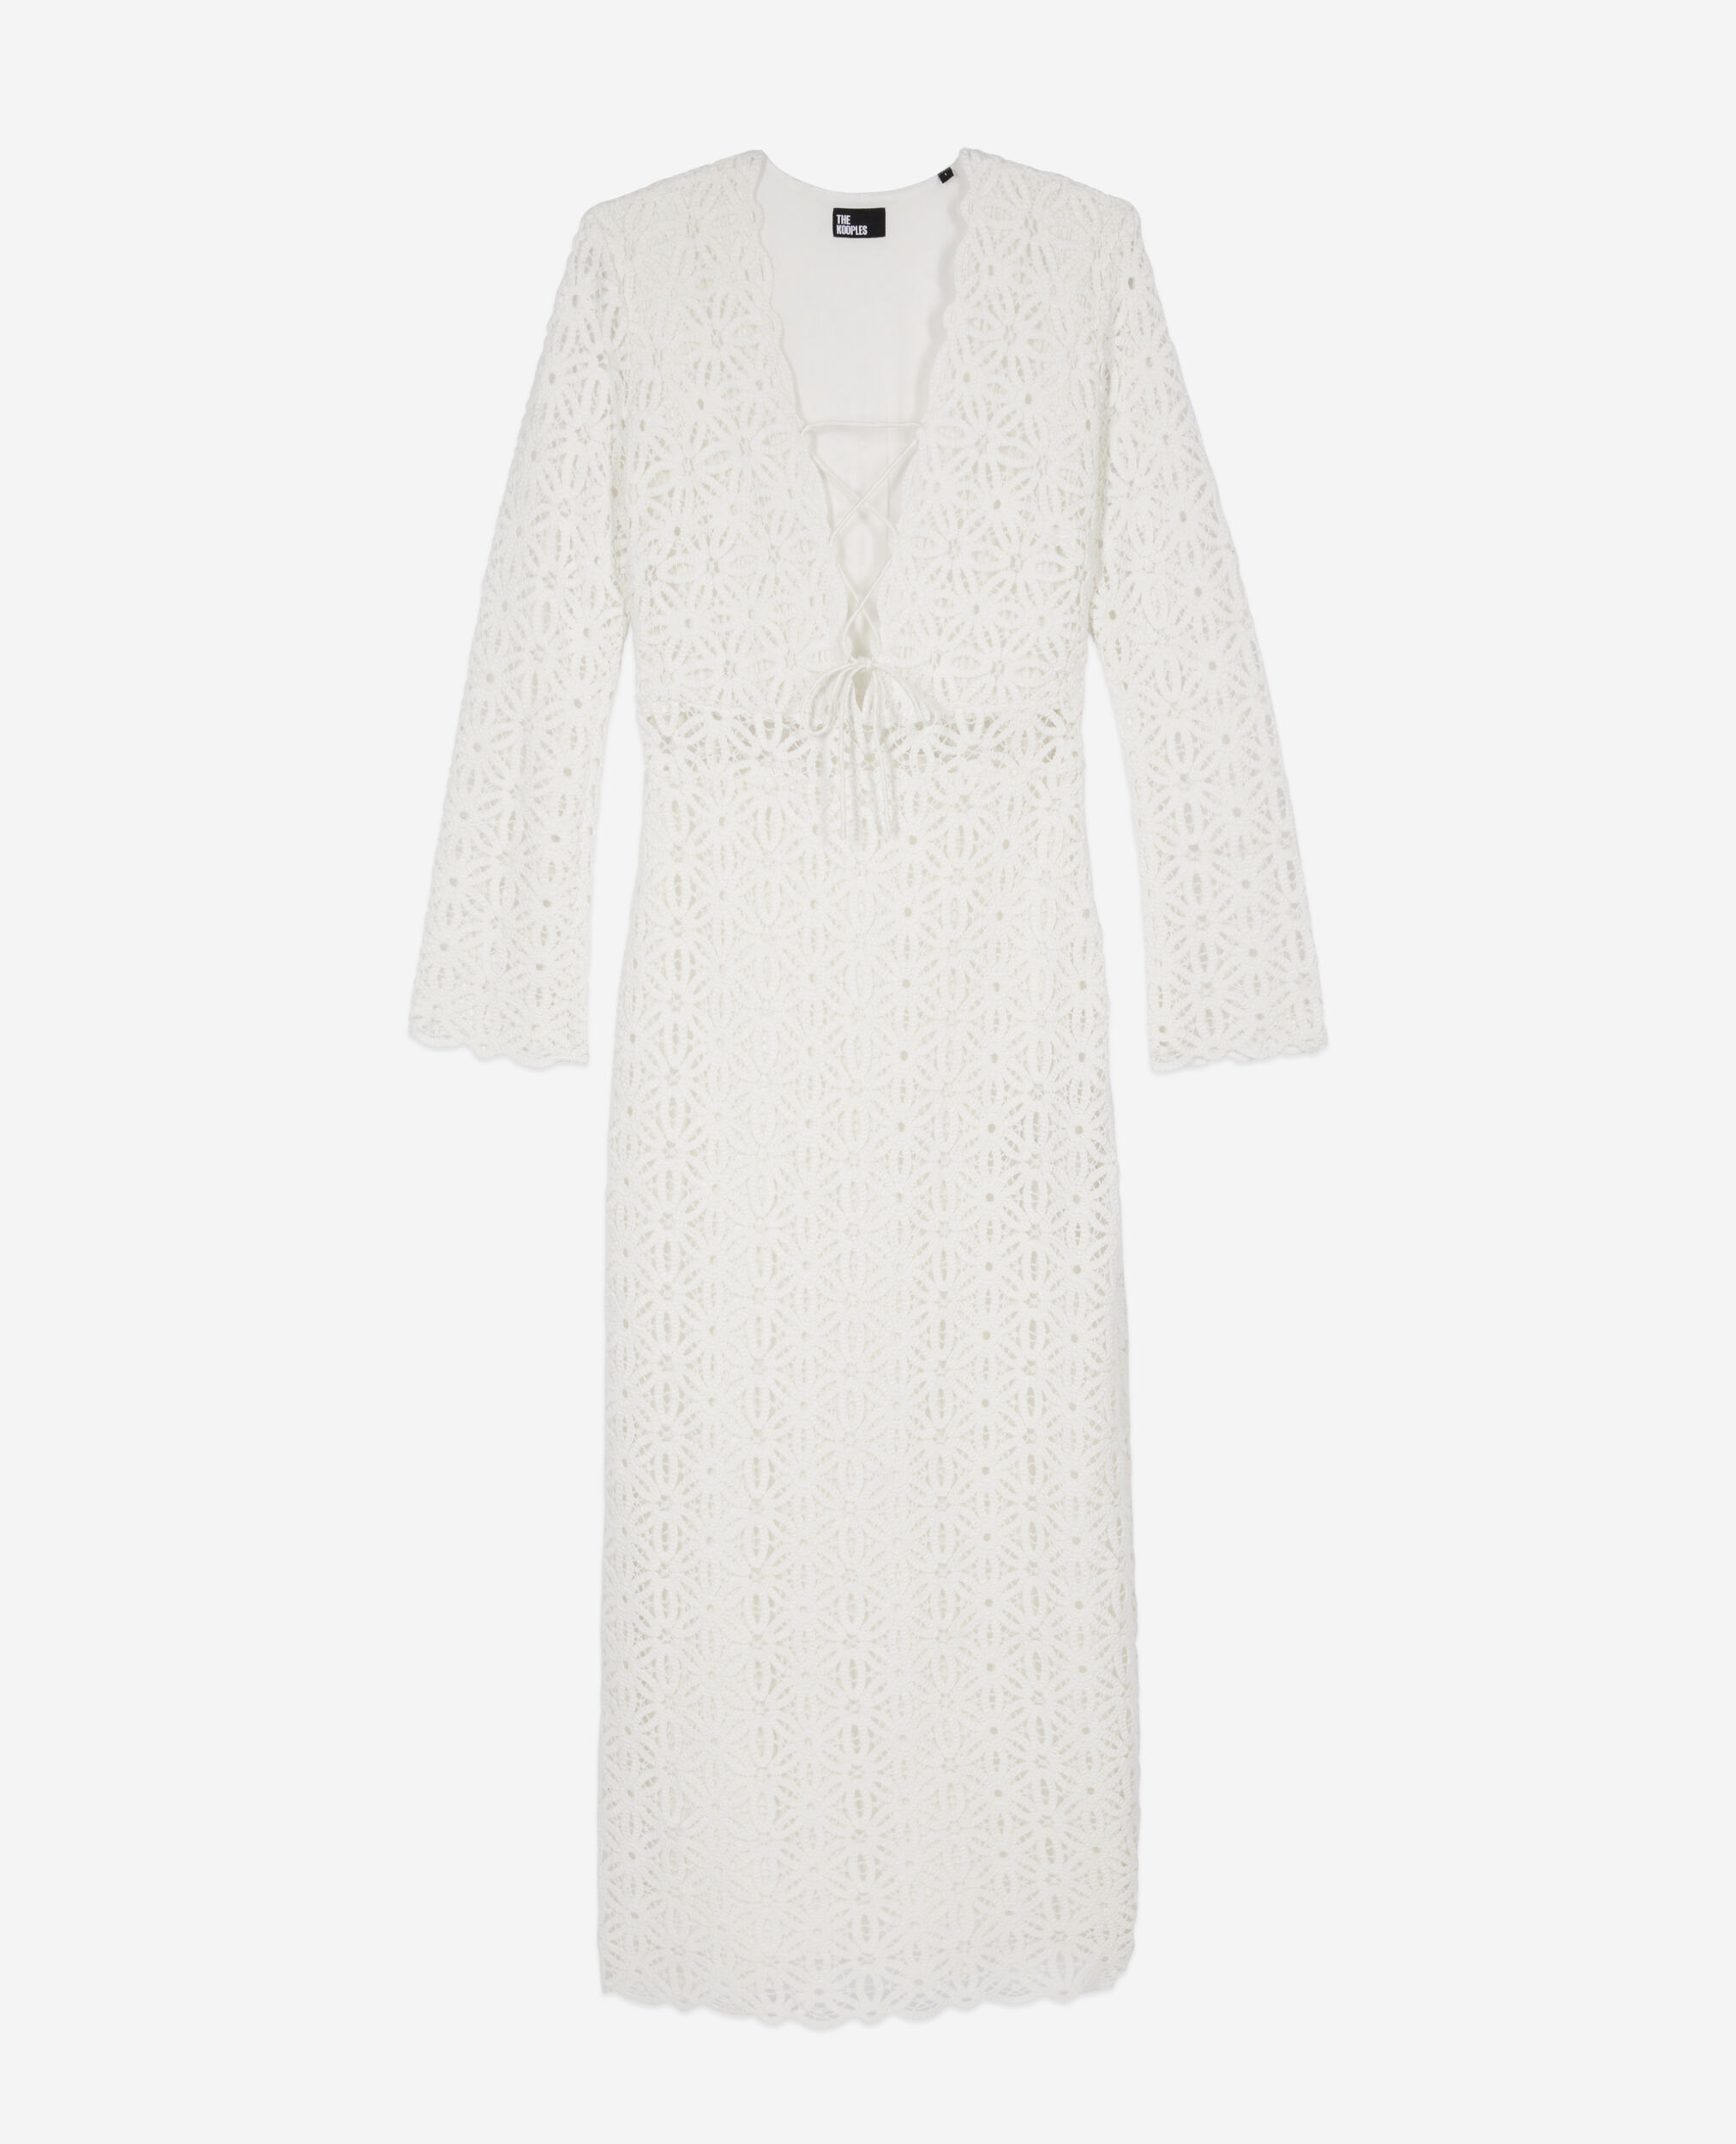 Robe longue blanche en guipure, WHITE, hi-res image number null